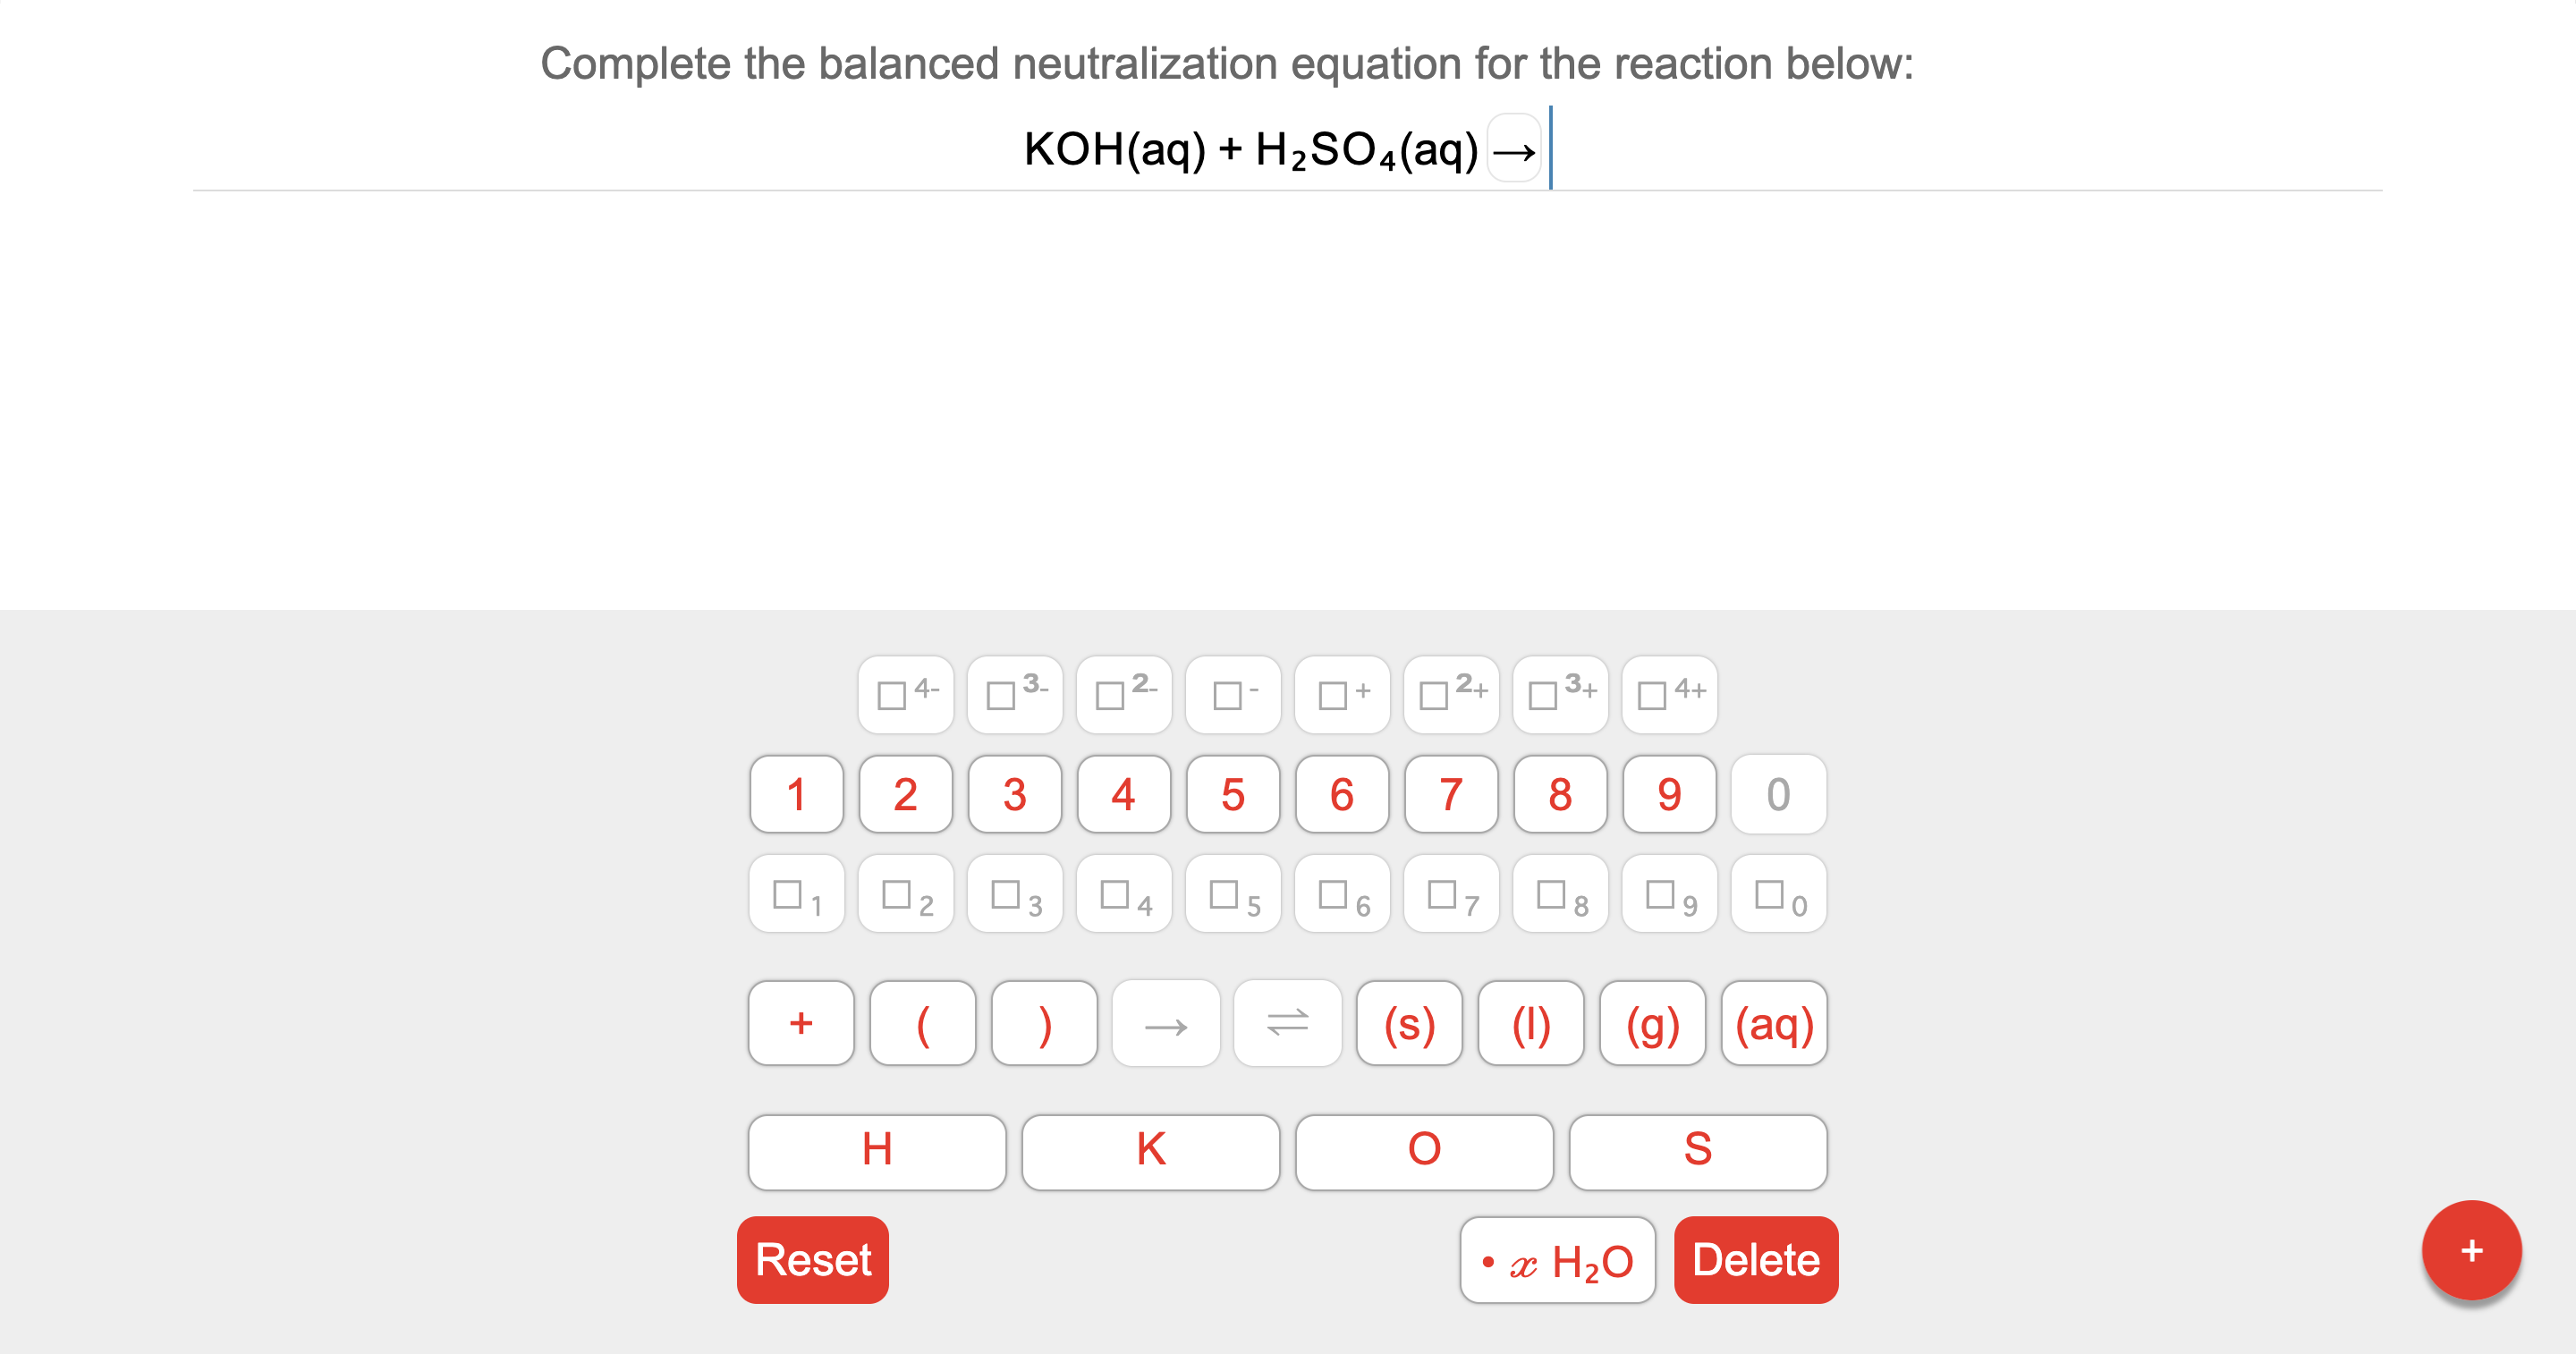 Complete the balanced neutralization equation for the reaction below:
KOH(aq) + H2SO4(aq)-
